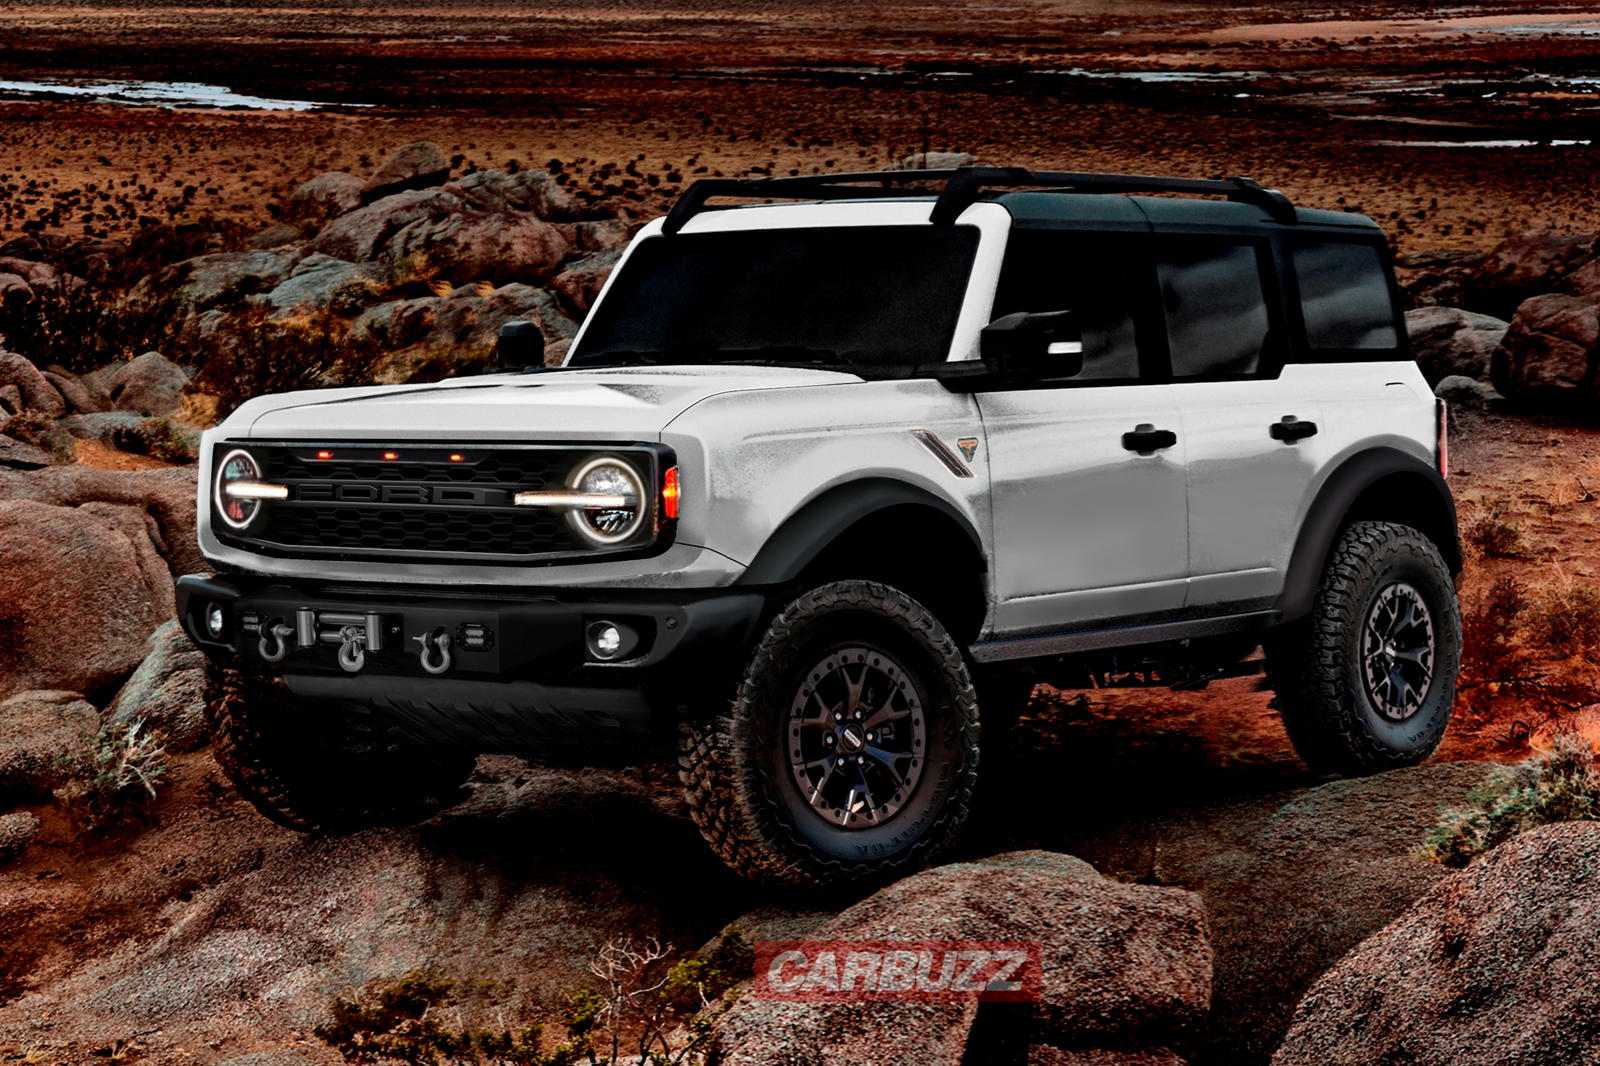 Best Look Yet At The Ford Bronco Warthog CarBuzz